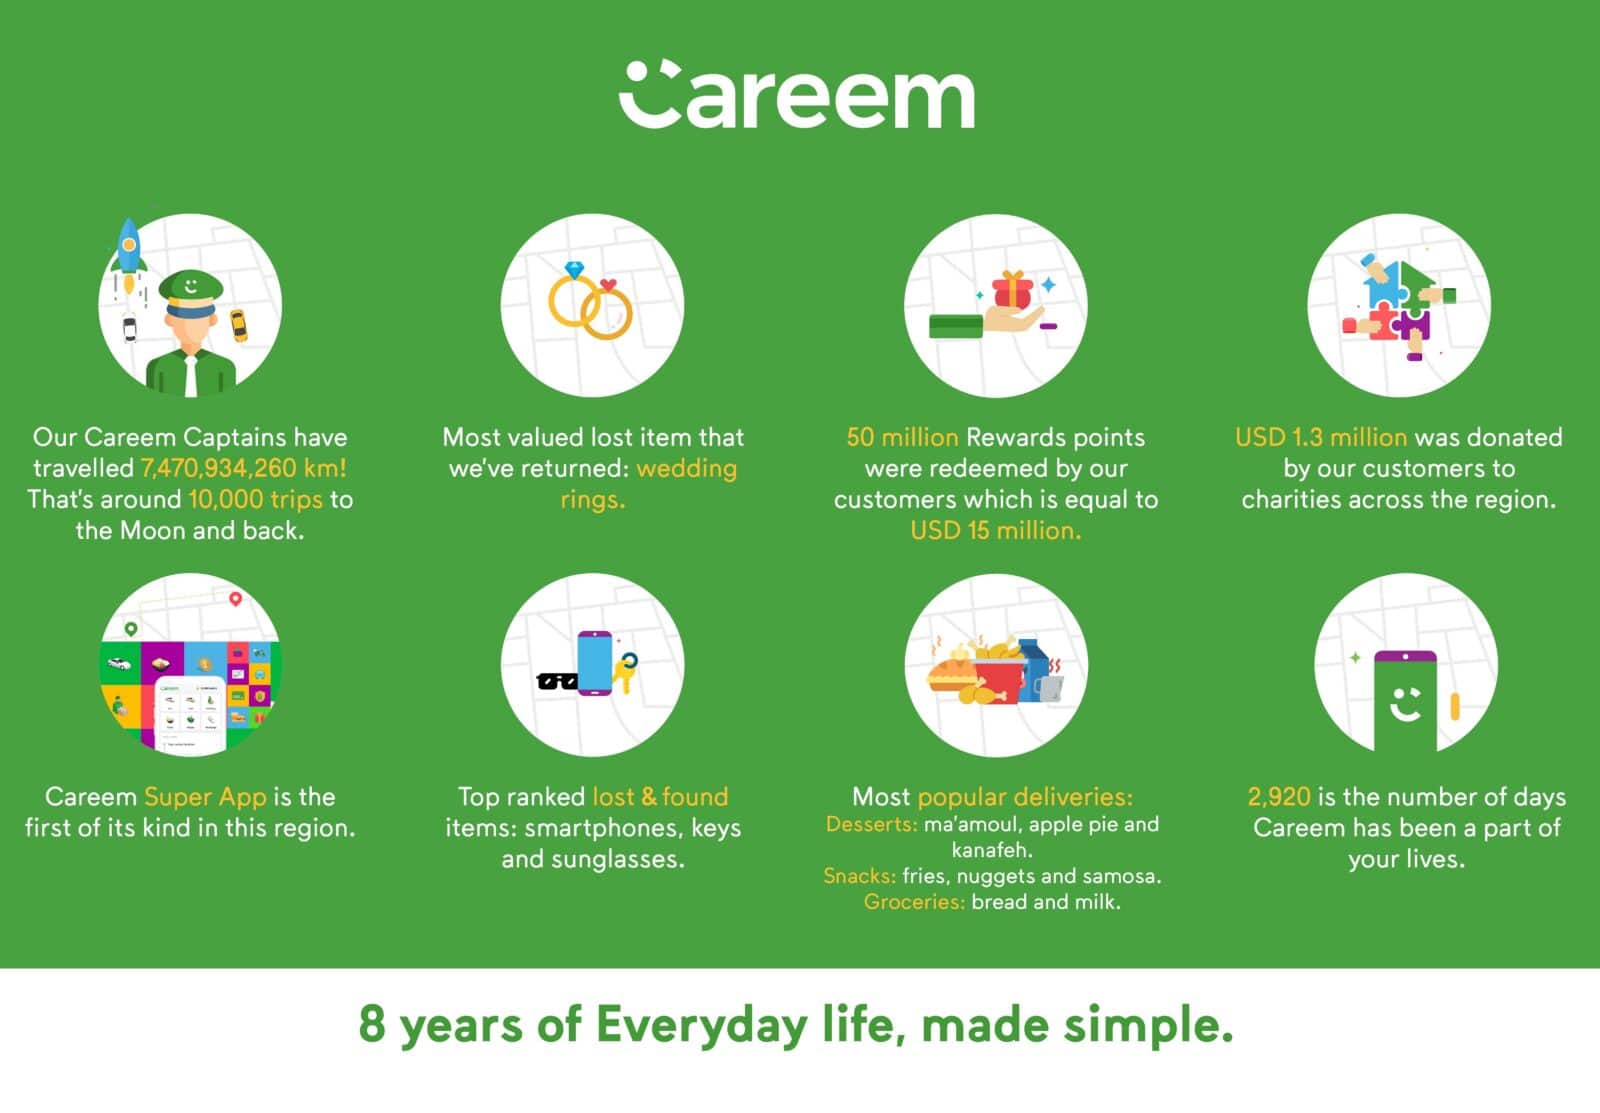 Careem Simplifying and Improving Lives Since Eight Years